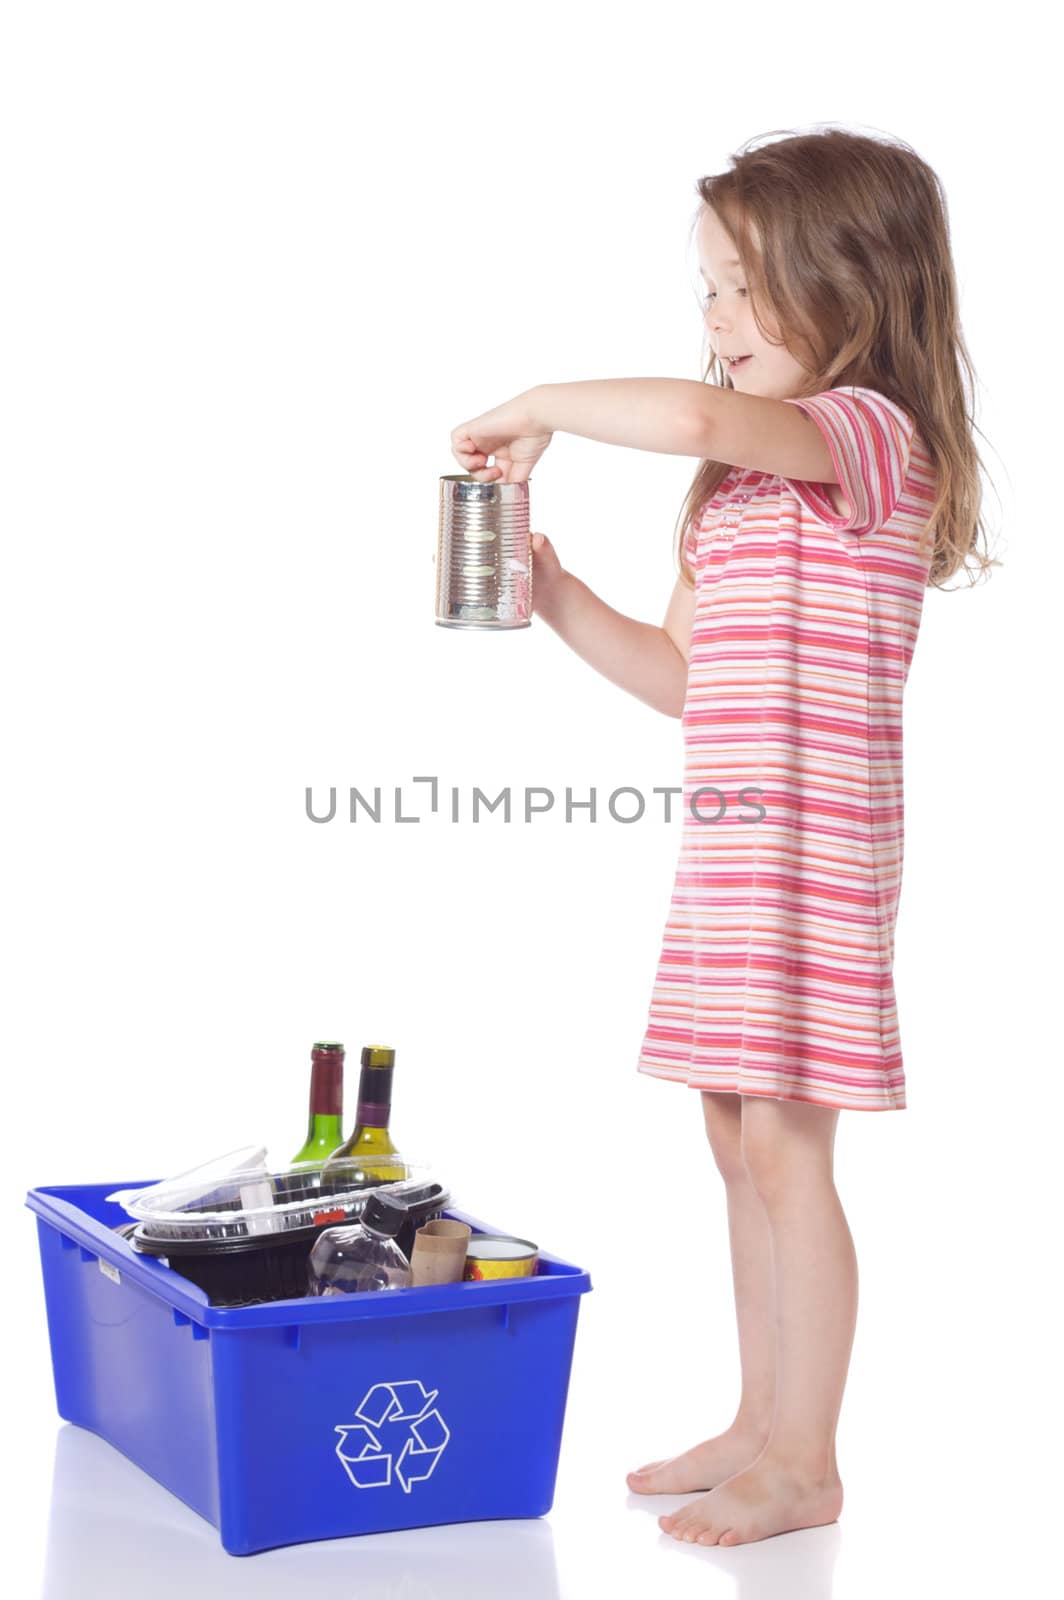 Young girl recycling by Talanis